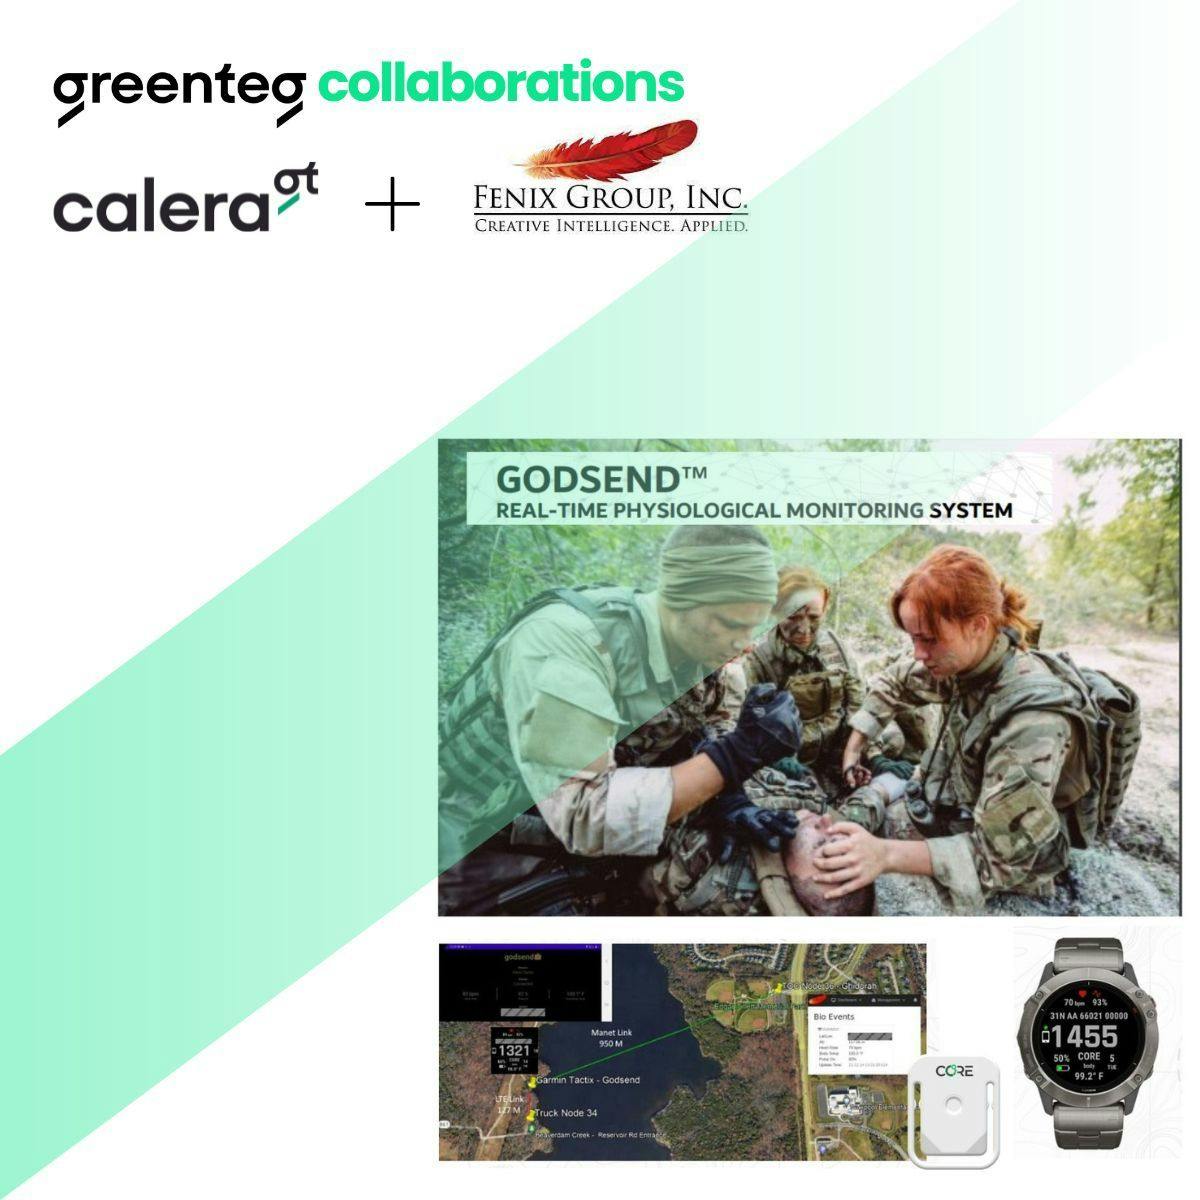 Fenix Group and greenteg collaborate to help soldiers stay safe in their missions 